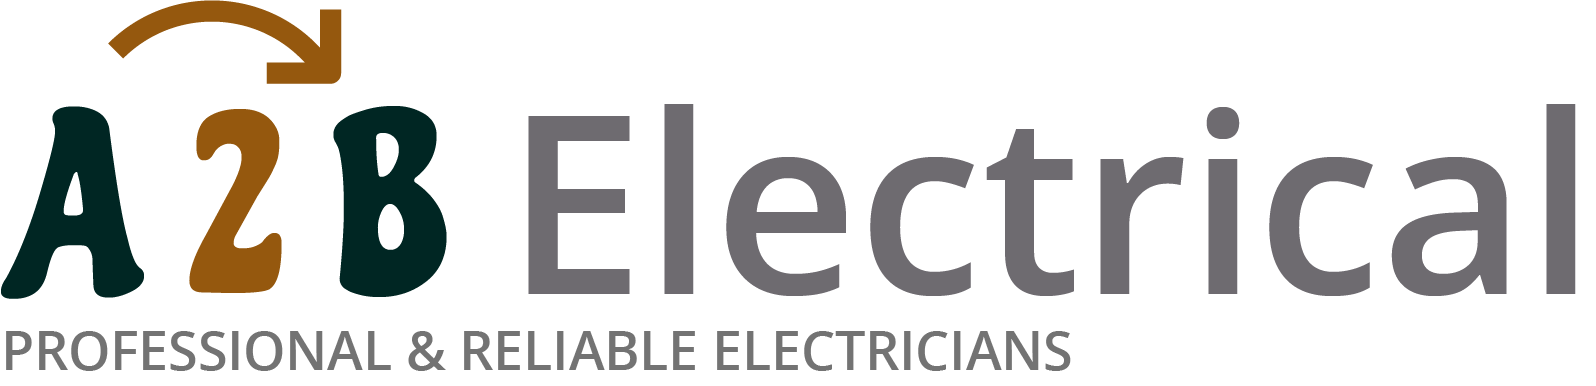 If you have electrical wiring problems in Harringay, we can provide an electrician to have a look for you. 